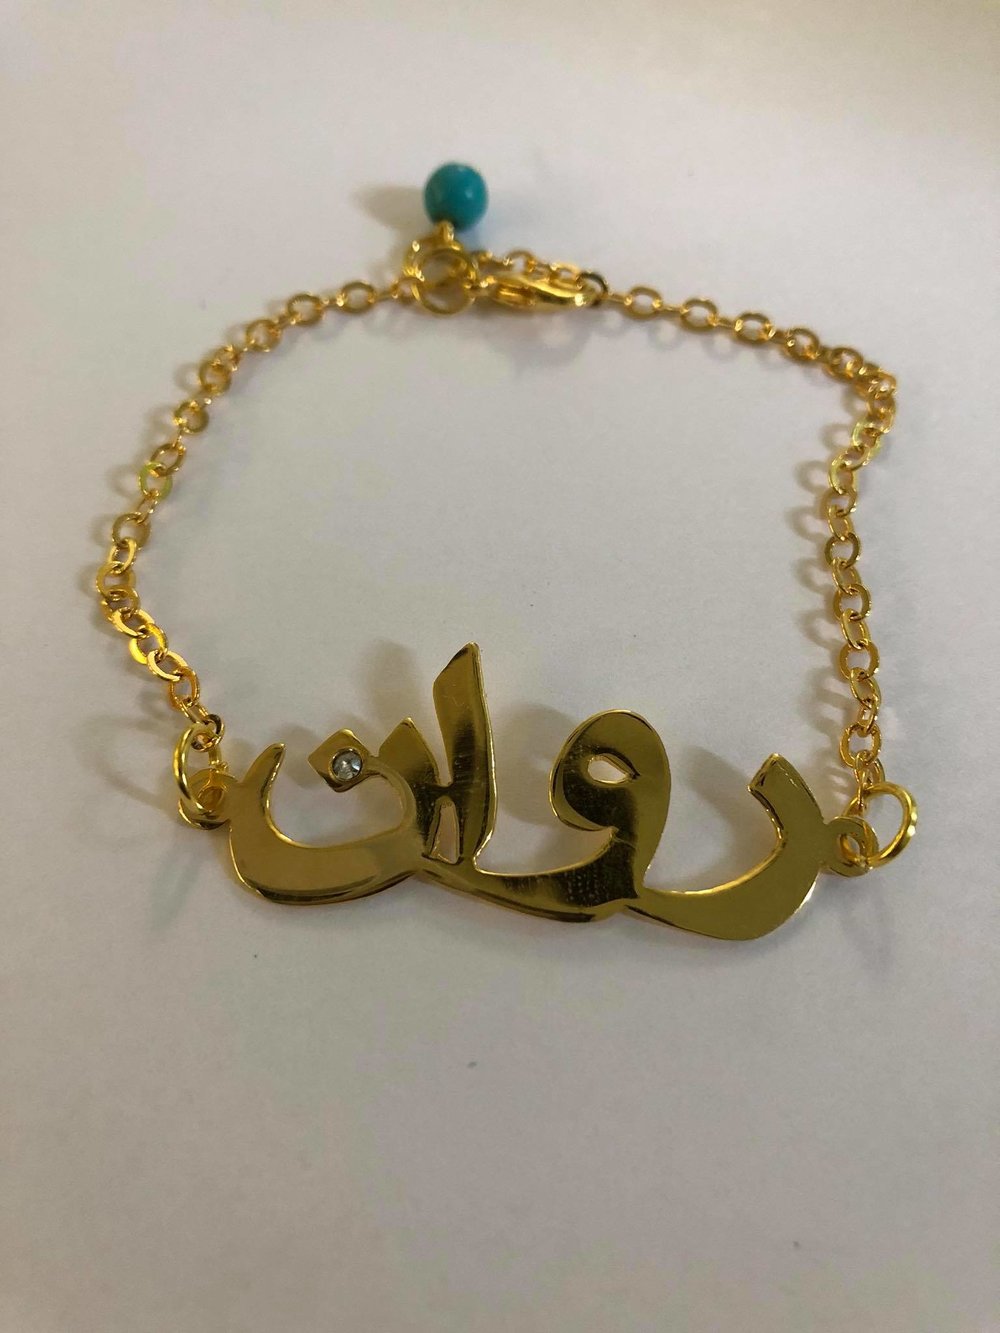 Customized - Bracelet + spaced letter name